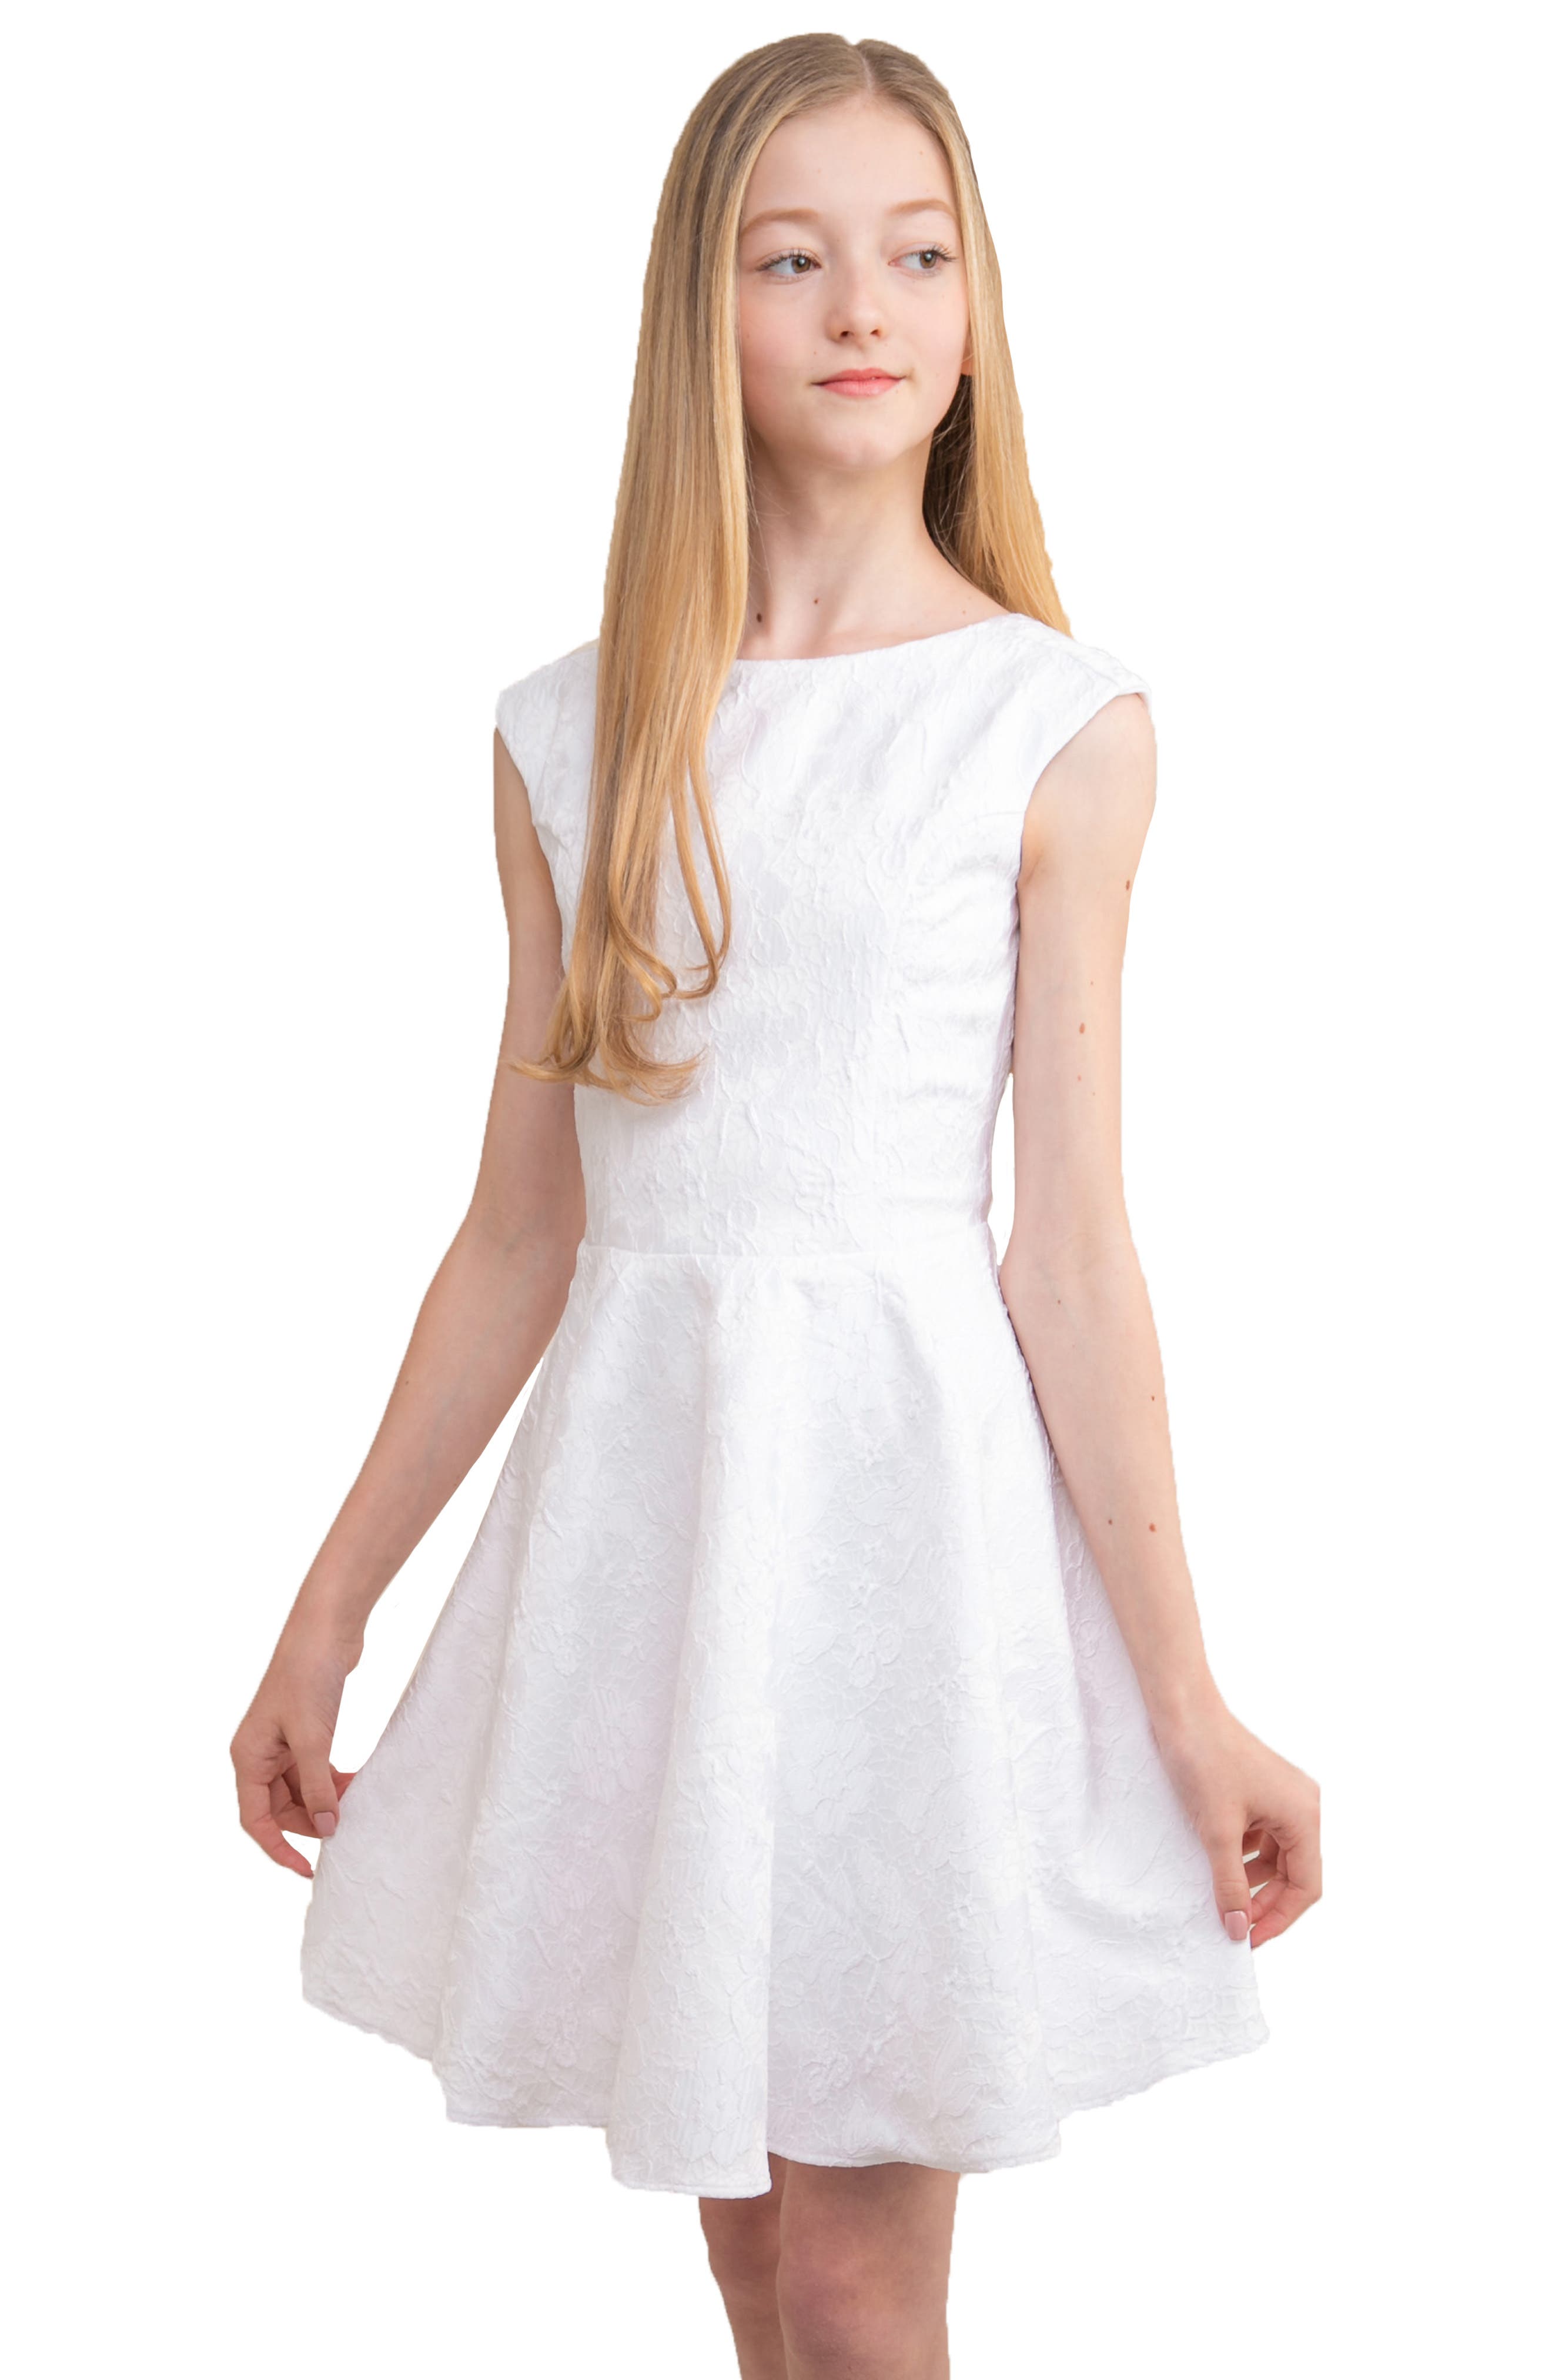 Big Girls' Party Dresses ☀ Rompers ...